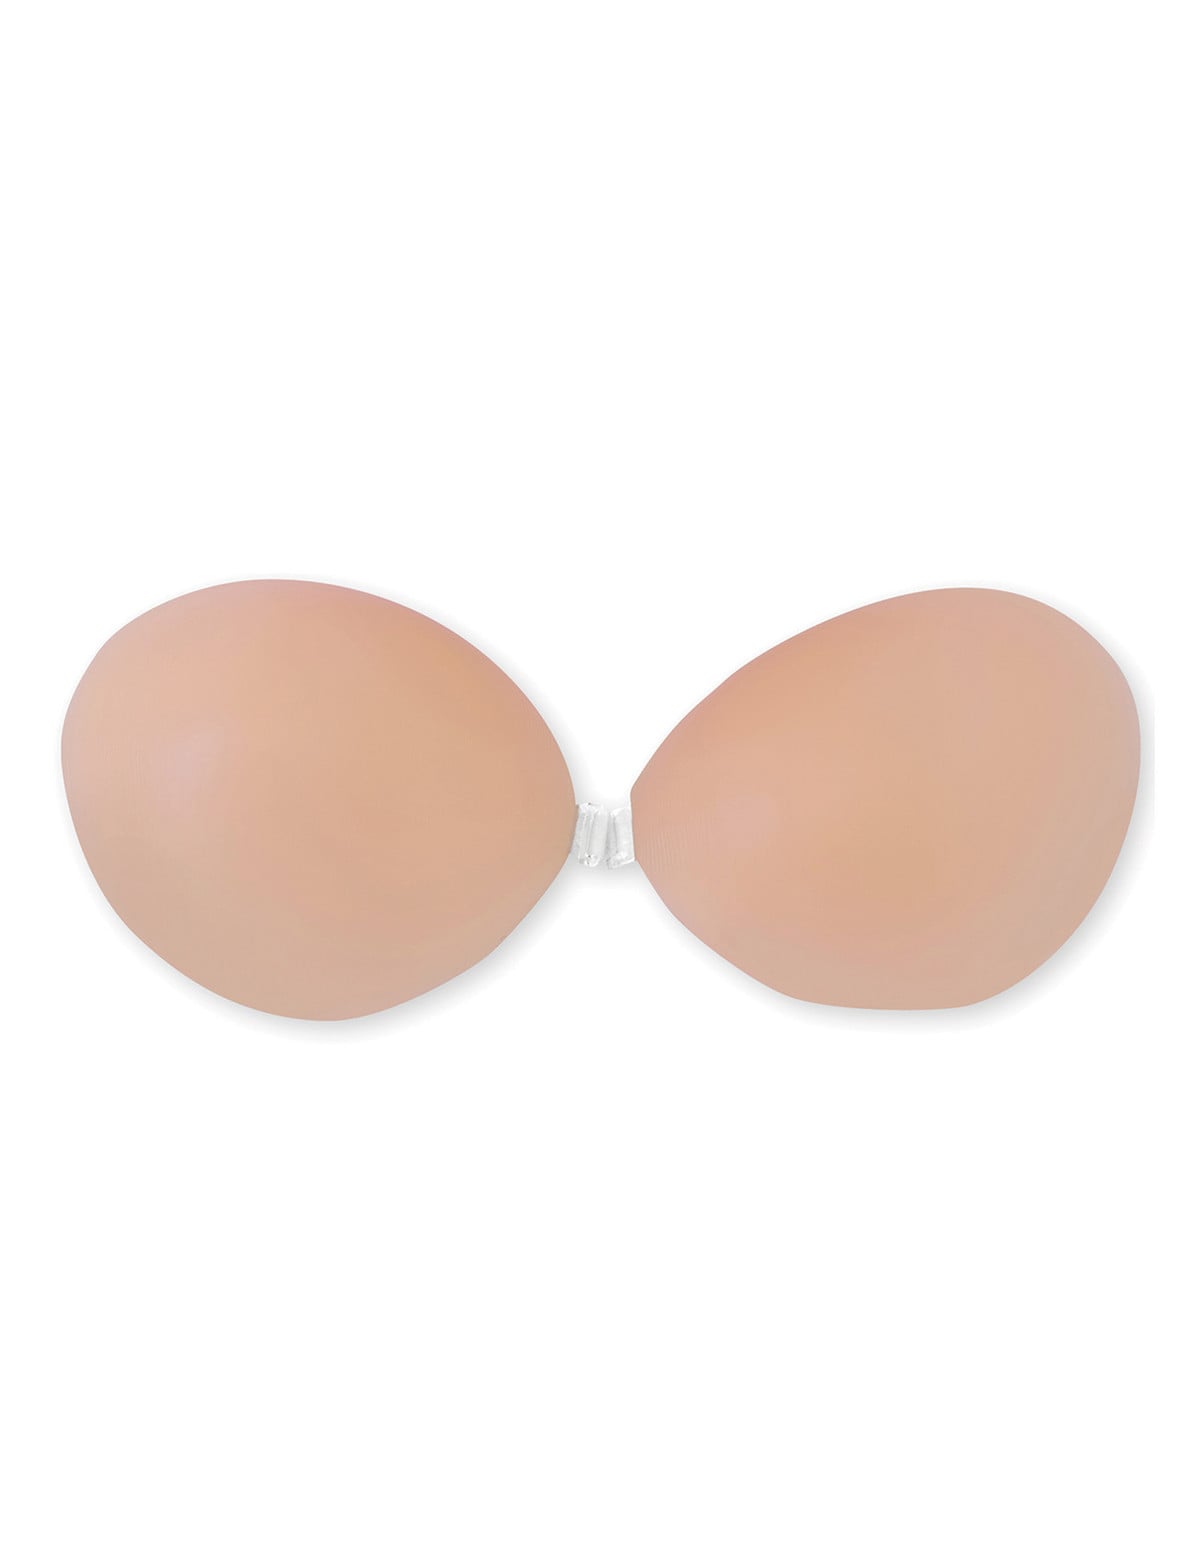 Plus 1 Pair Silicone Self Adhesive Bra for Sale New Zealand